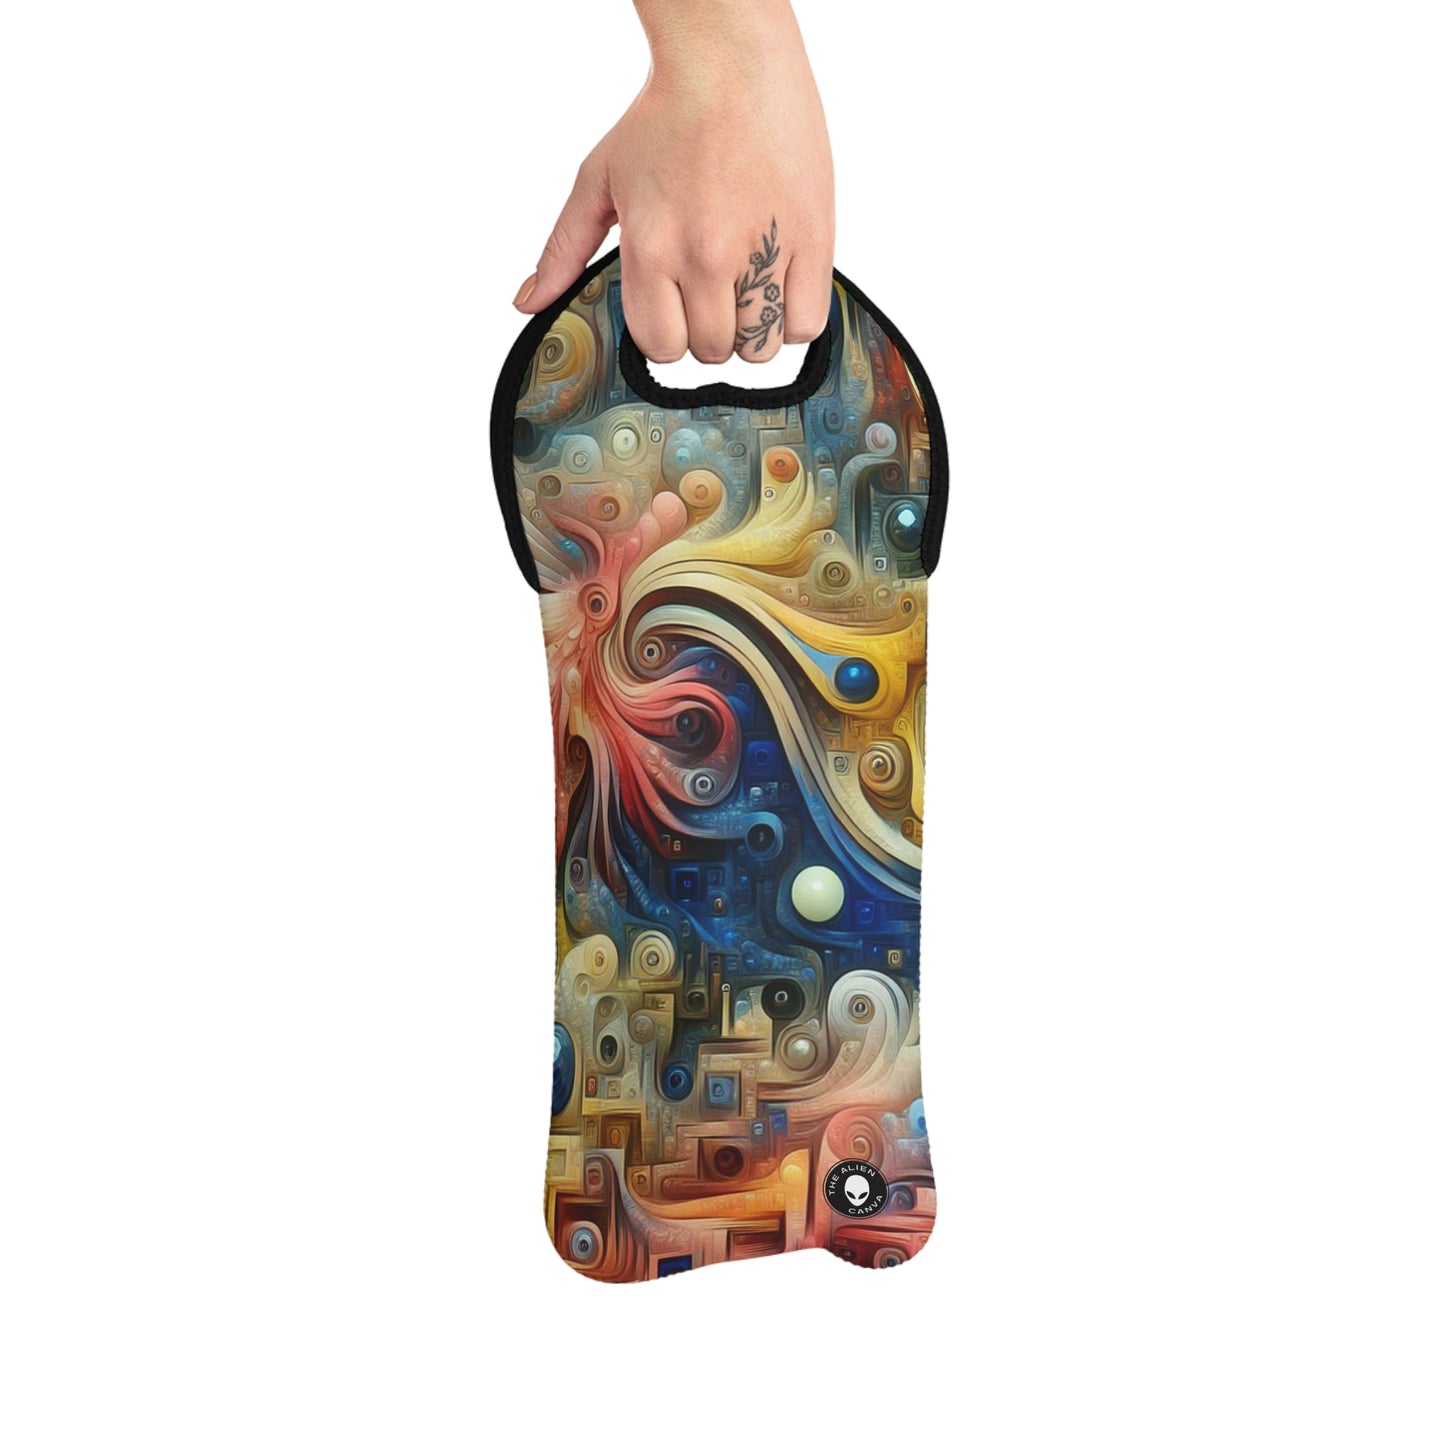 "The Timeless Garden: A Surreal Fusion of Nature and Time" - The Alien Wine Tote Bag Surrealism